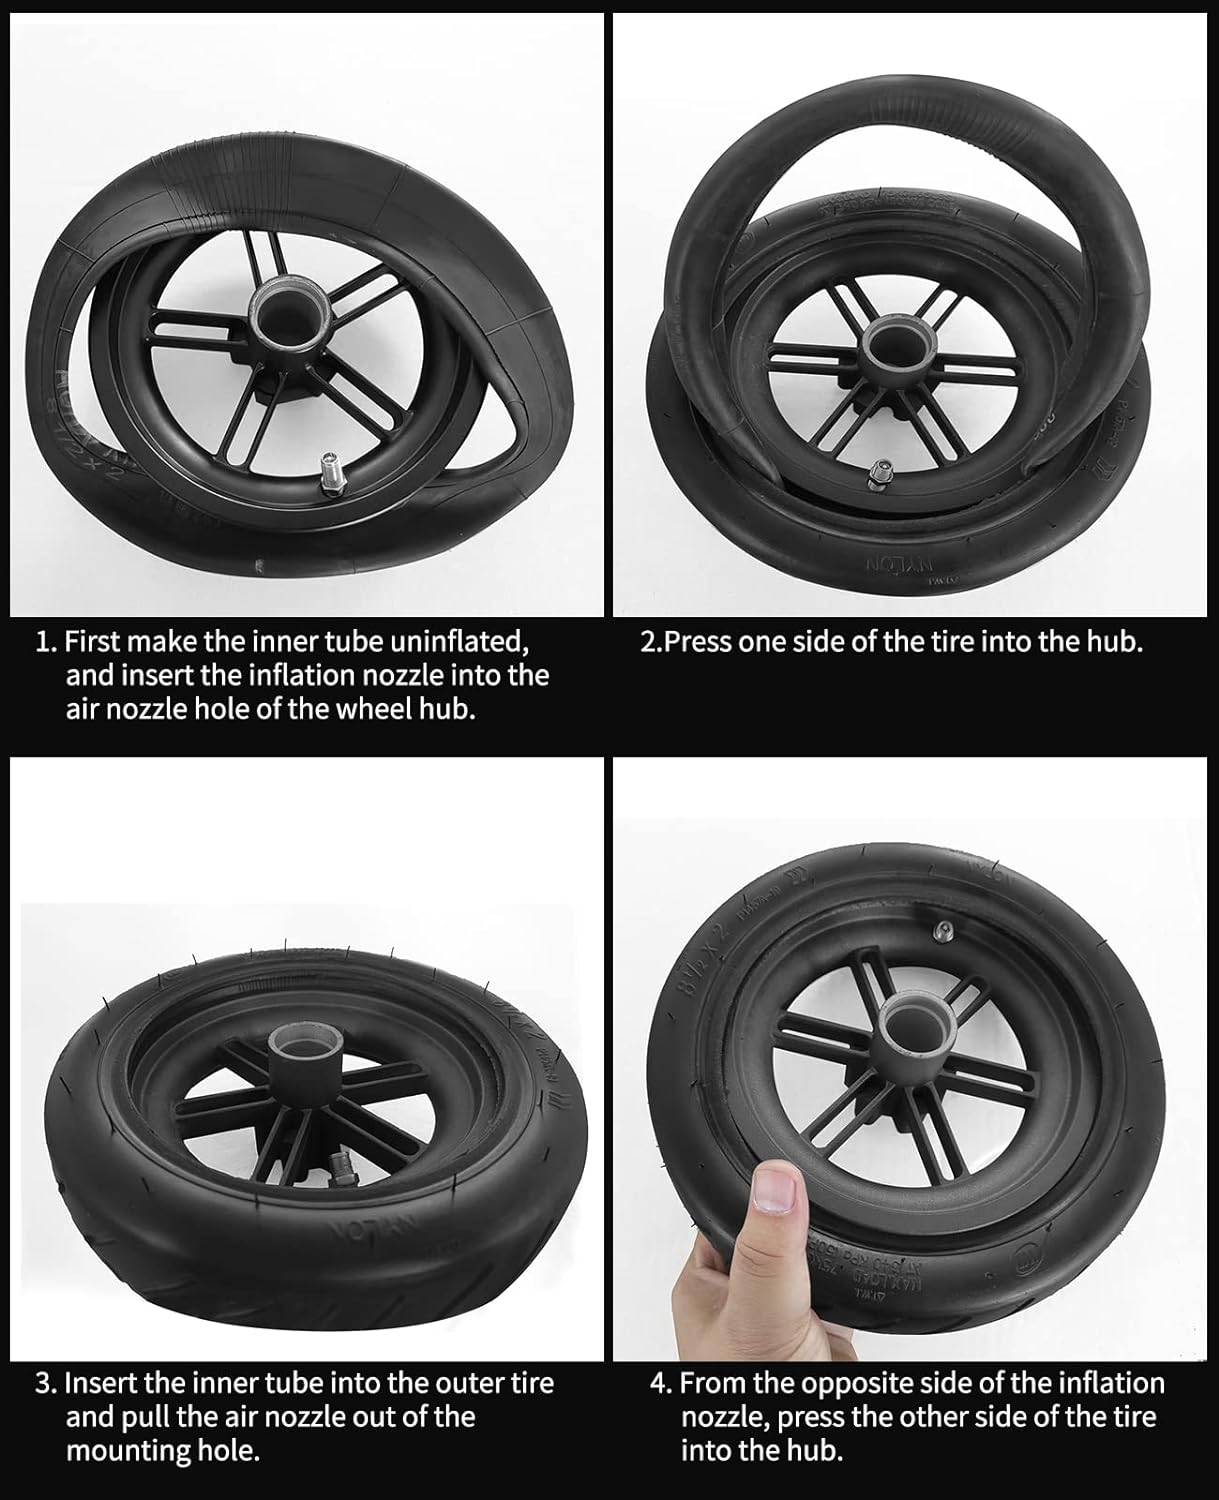 8.5 Inch Scooter Replacement Tire & Inner Tubes, 50/75-6.1 Compatible for  M365/Pro/1S, 8 1/2X2 Electric Scooter Tires Rubber Vibration Dampers Tyre 